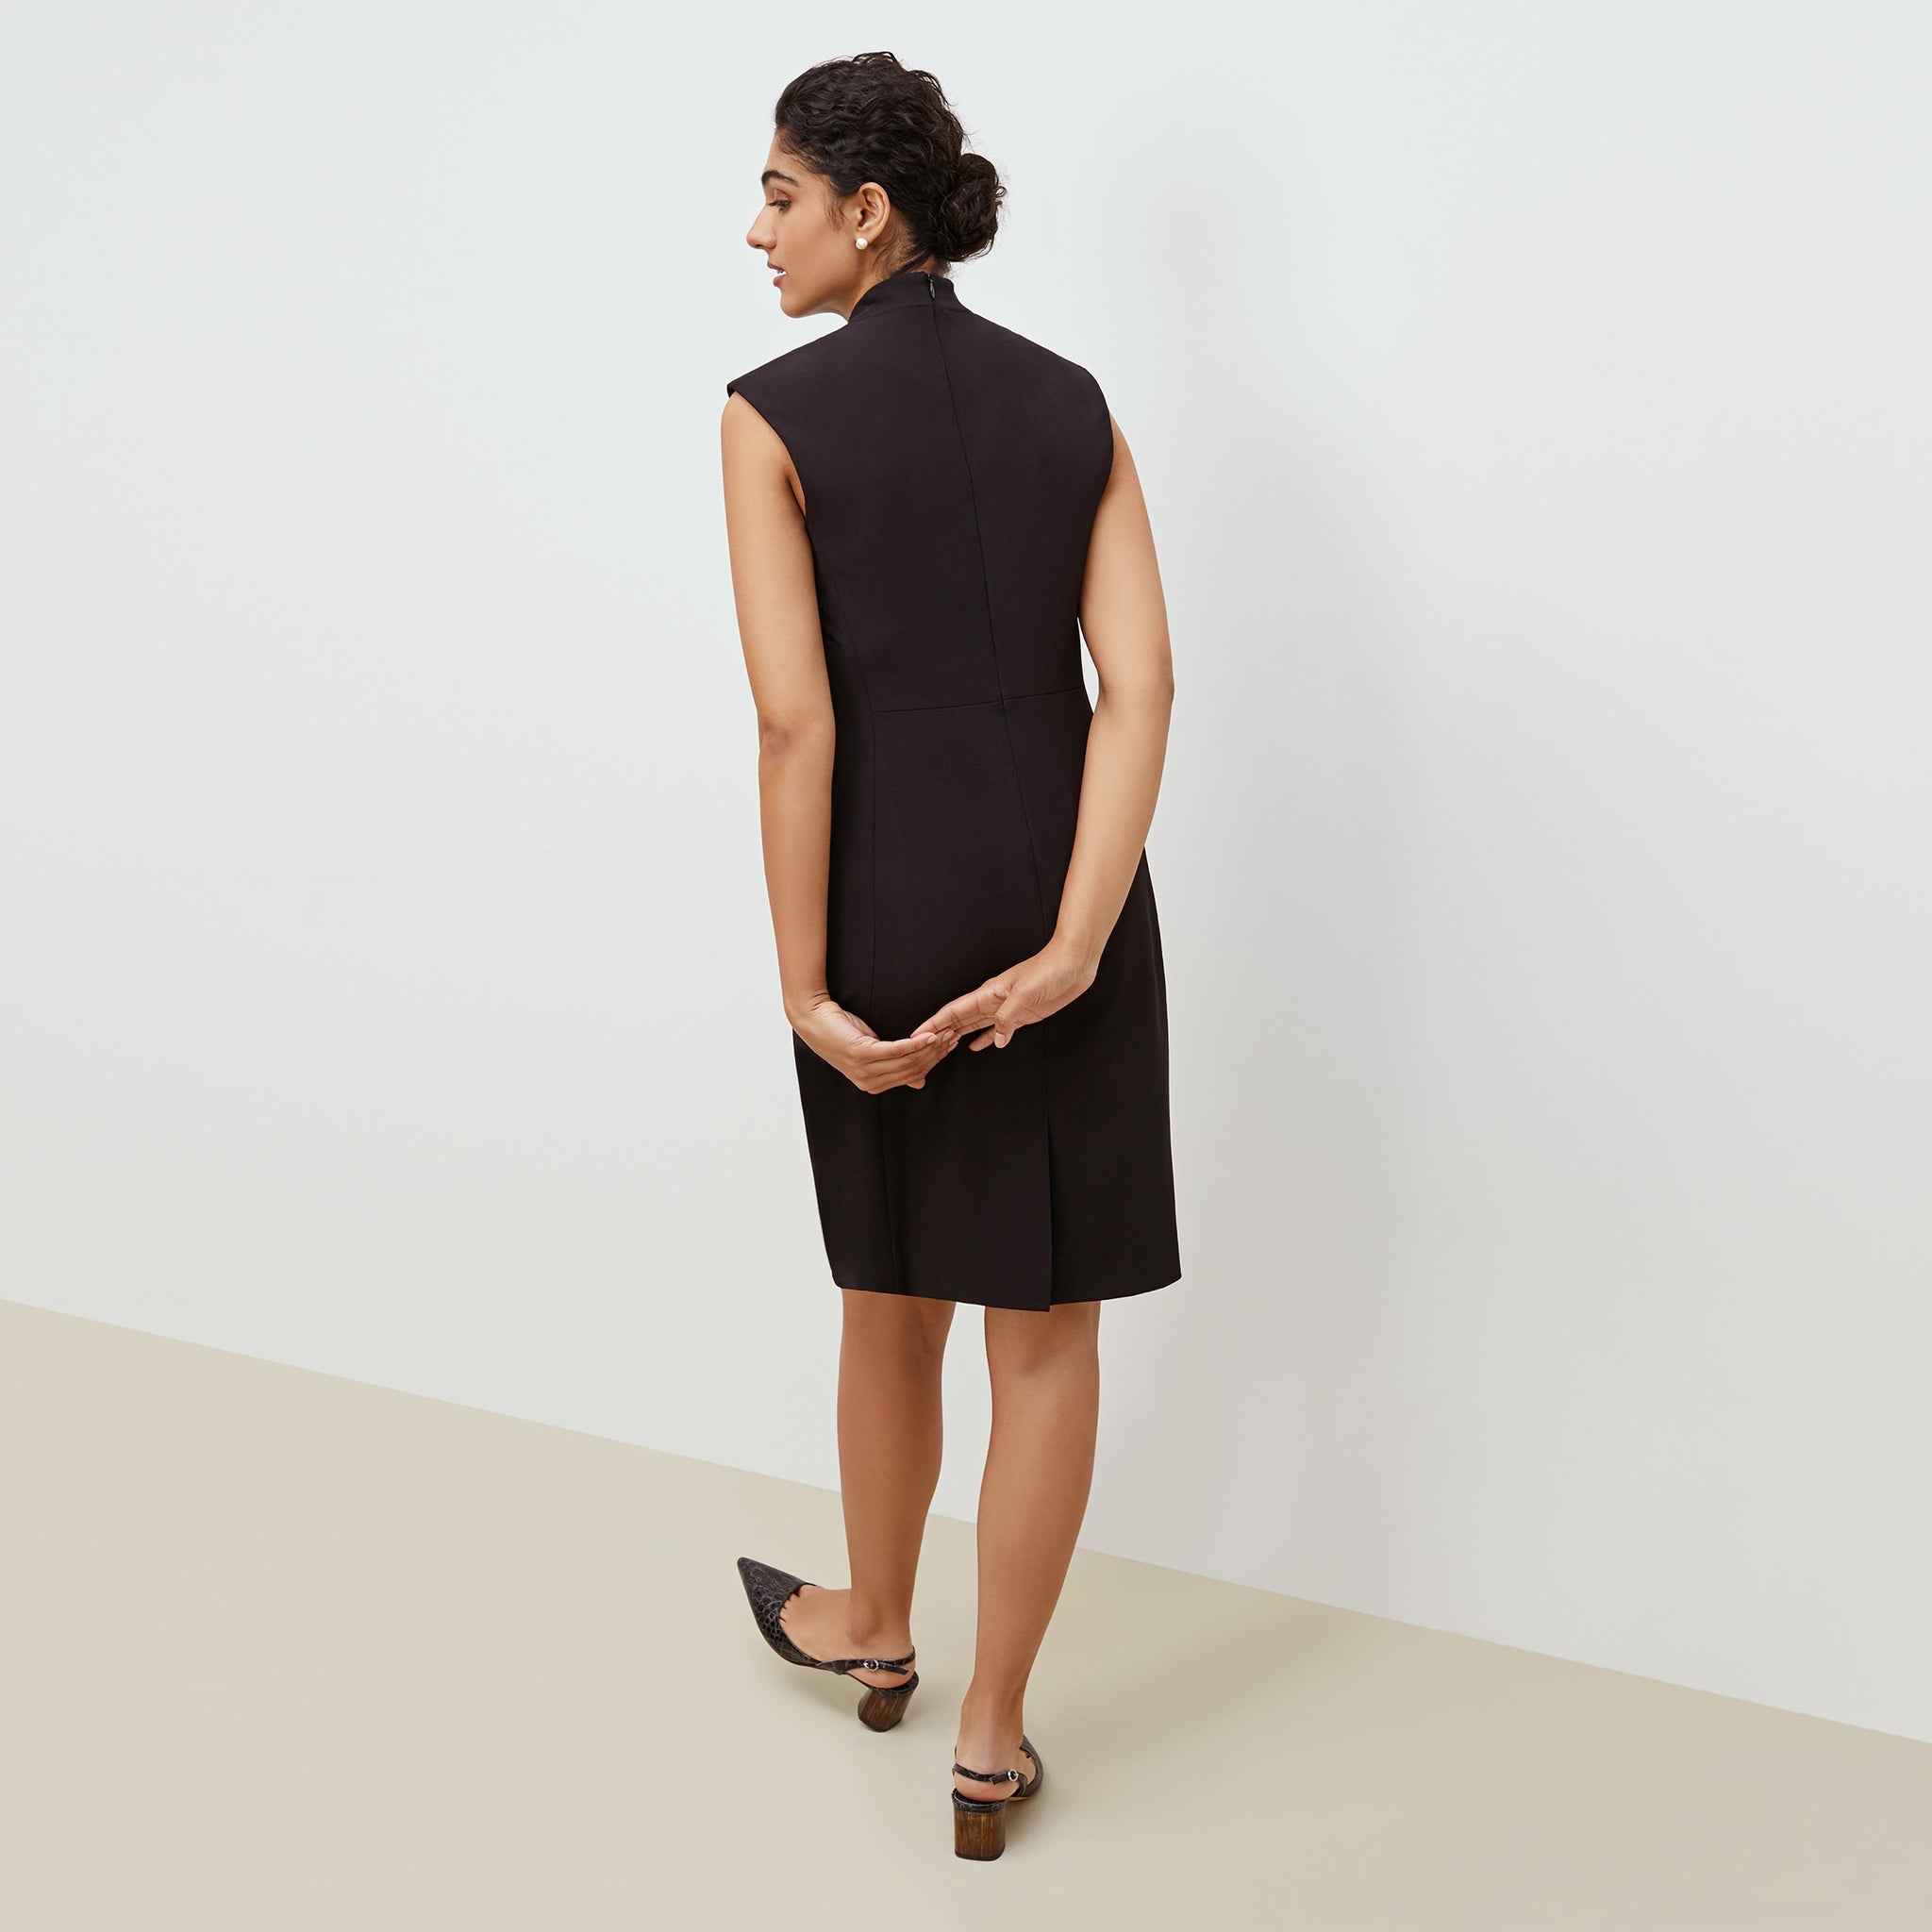 Back image of a woman standing wearing the Aditi dress in black